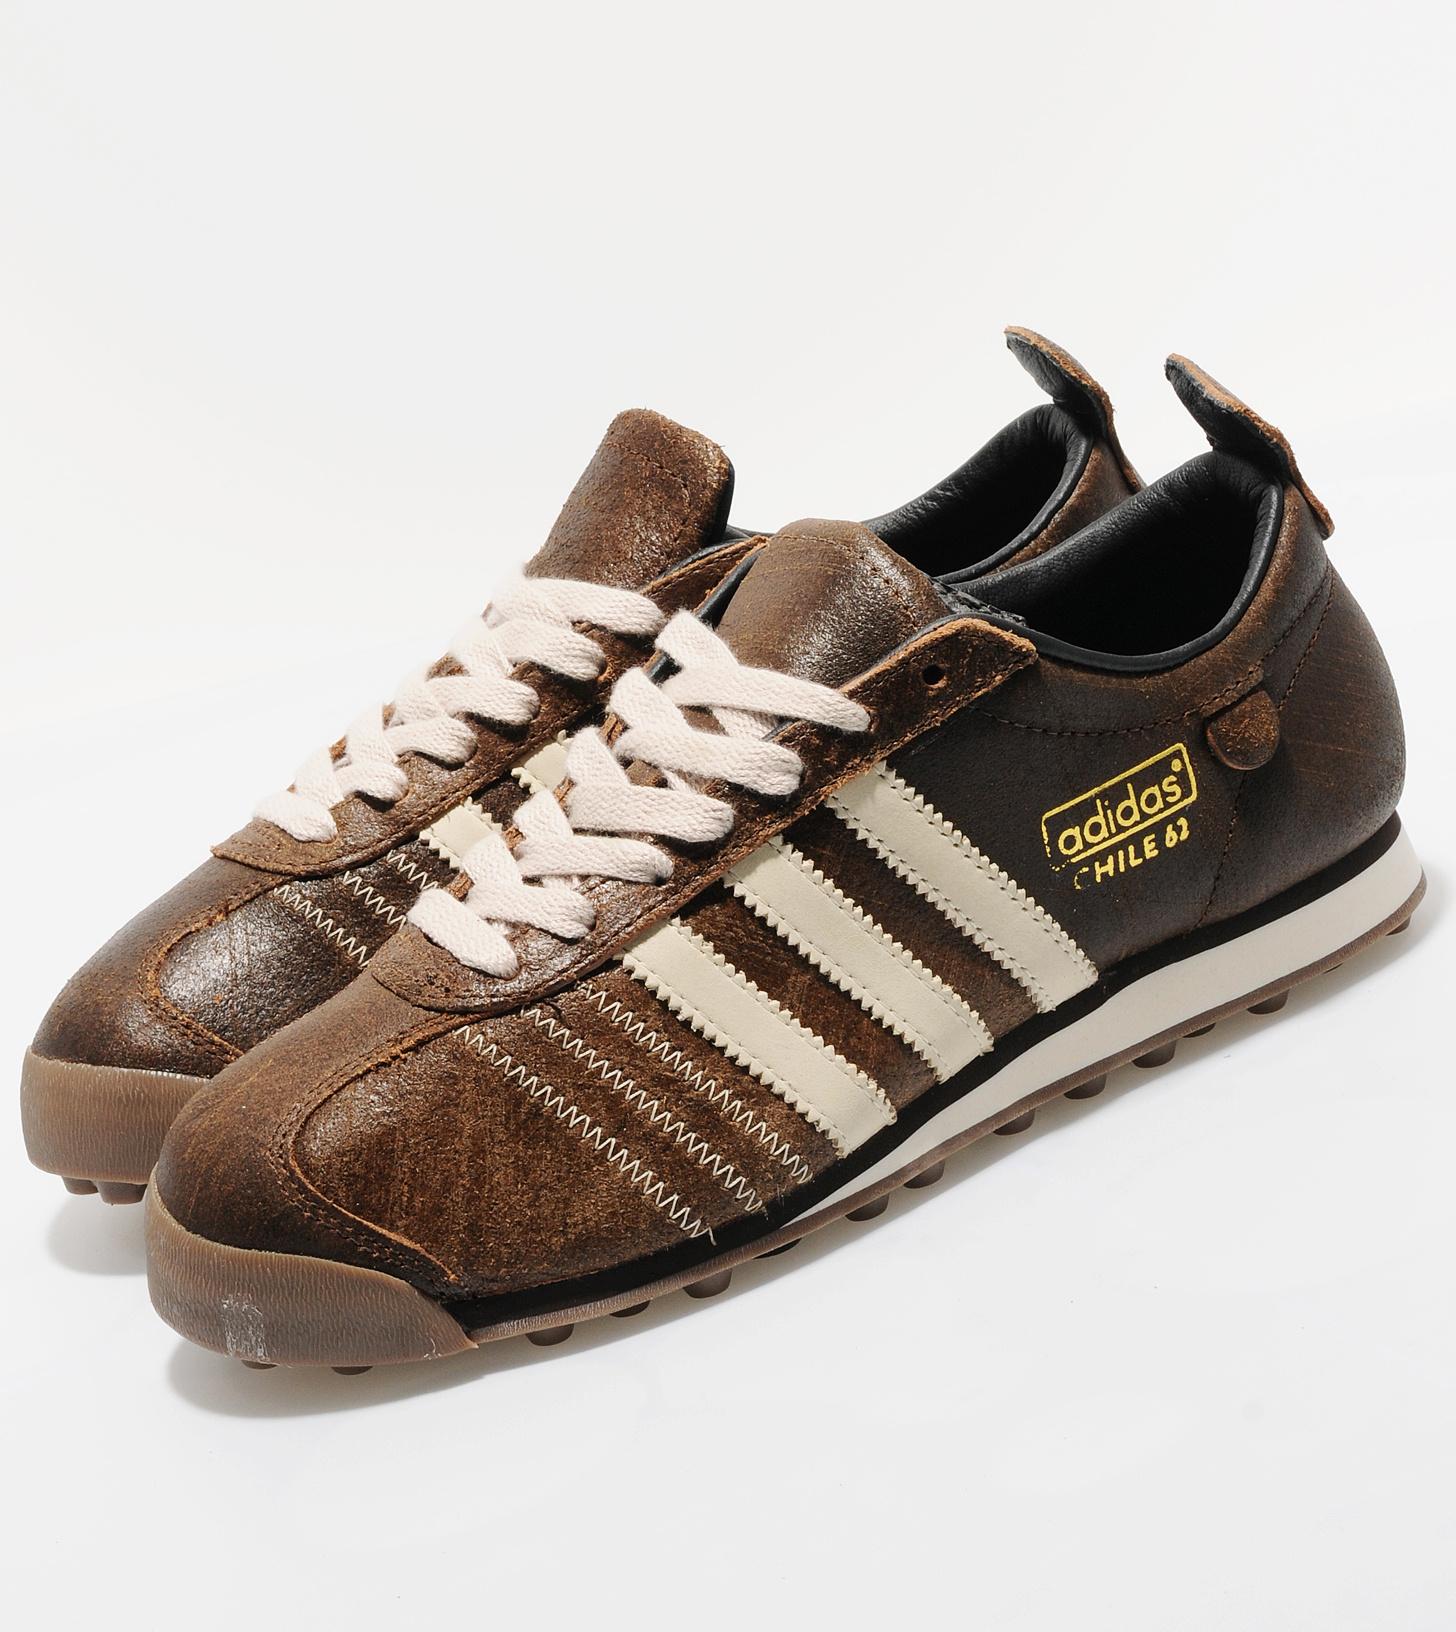 adidas chile 62 off 63% - www.intolegalworld.com